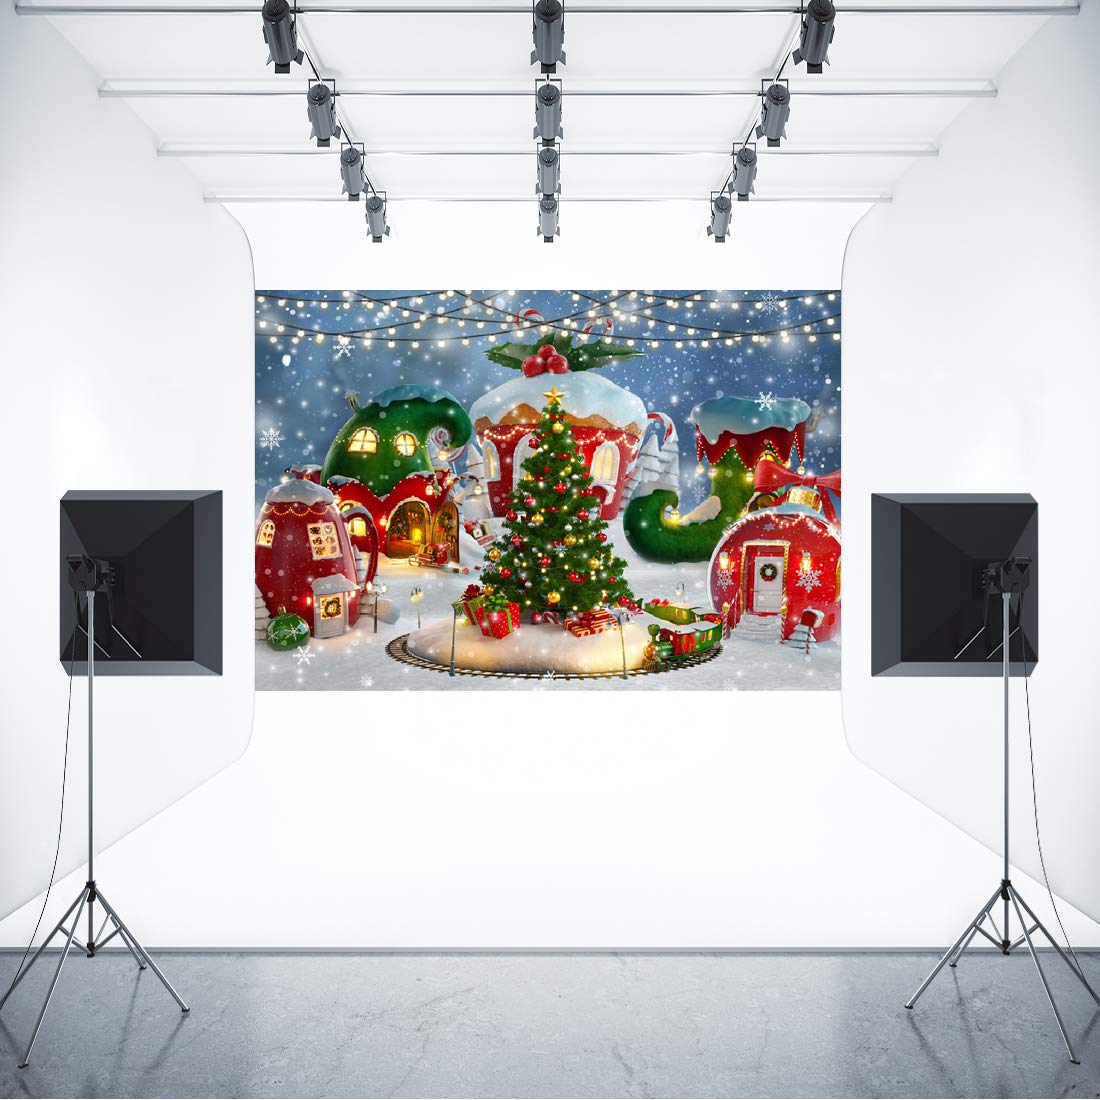 Aperturee 7x5ft Christmas Candy House Photography Backdrop Whoville Decoration Winter Snow Pine Tree Xmas Tree Snowflake Lollipop Background Newborn Baby Shower Photo Studio Booth Prop Banner